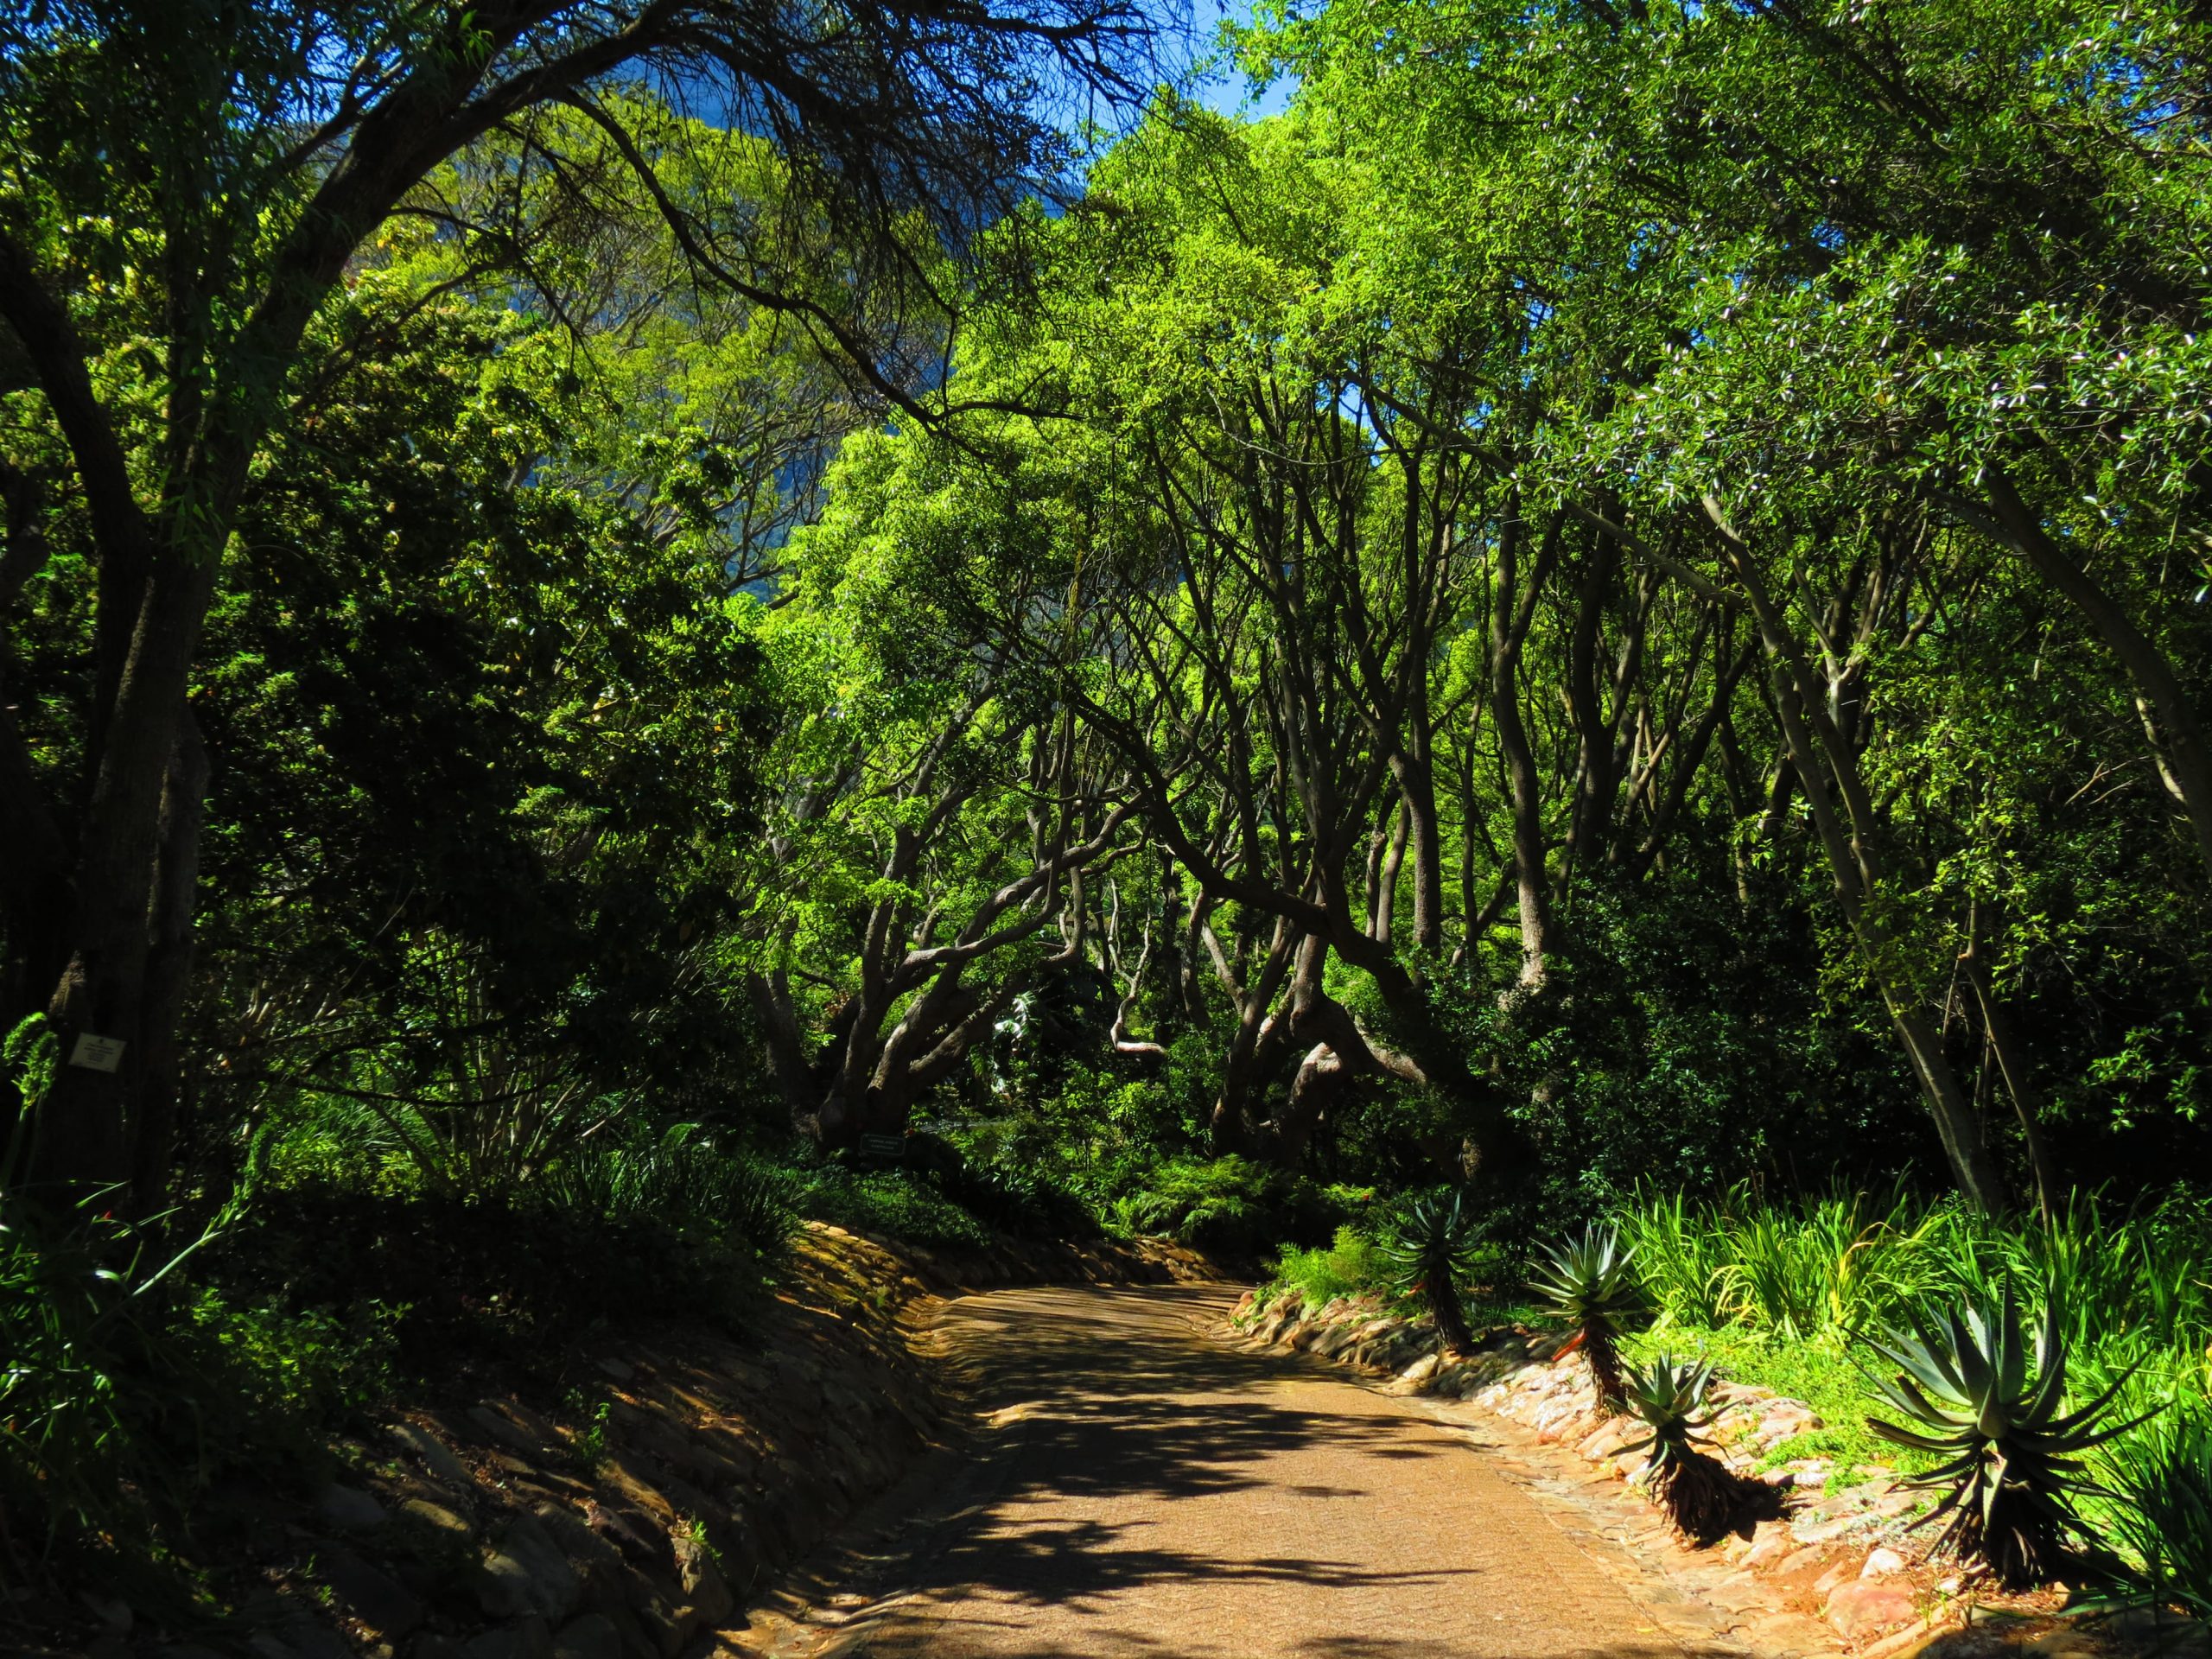 South Africa Driving Tour with Classic Travelling - Kirstenbosch